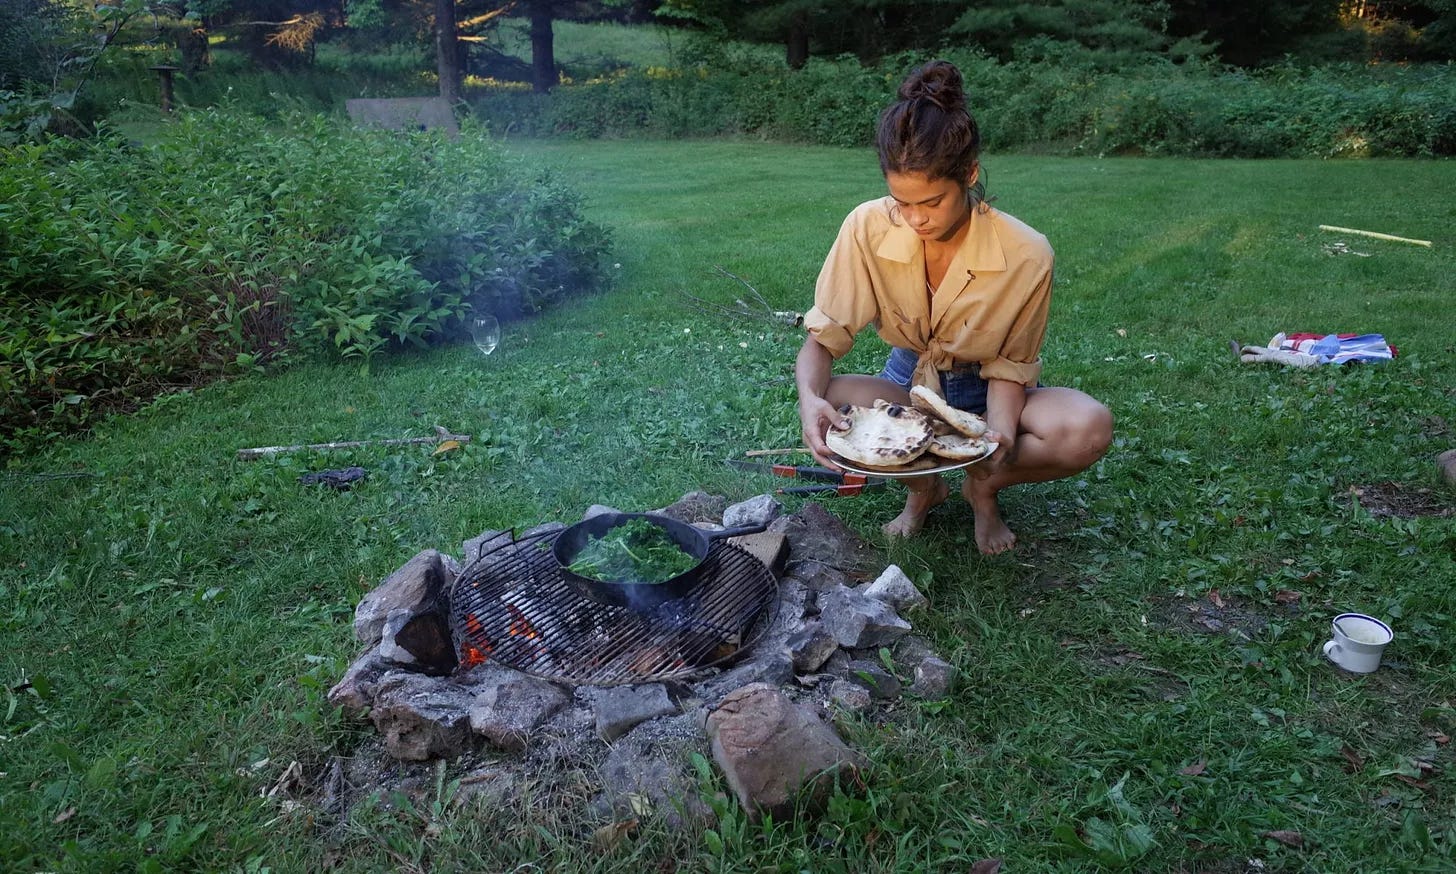 lexie smith baking flatbread at her farm in upstate new york